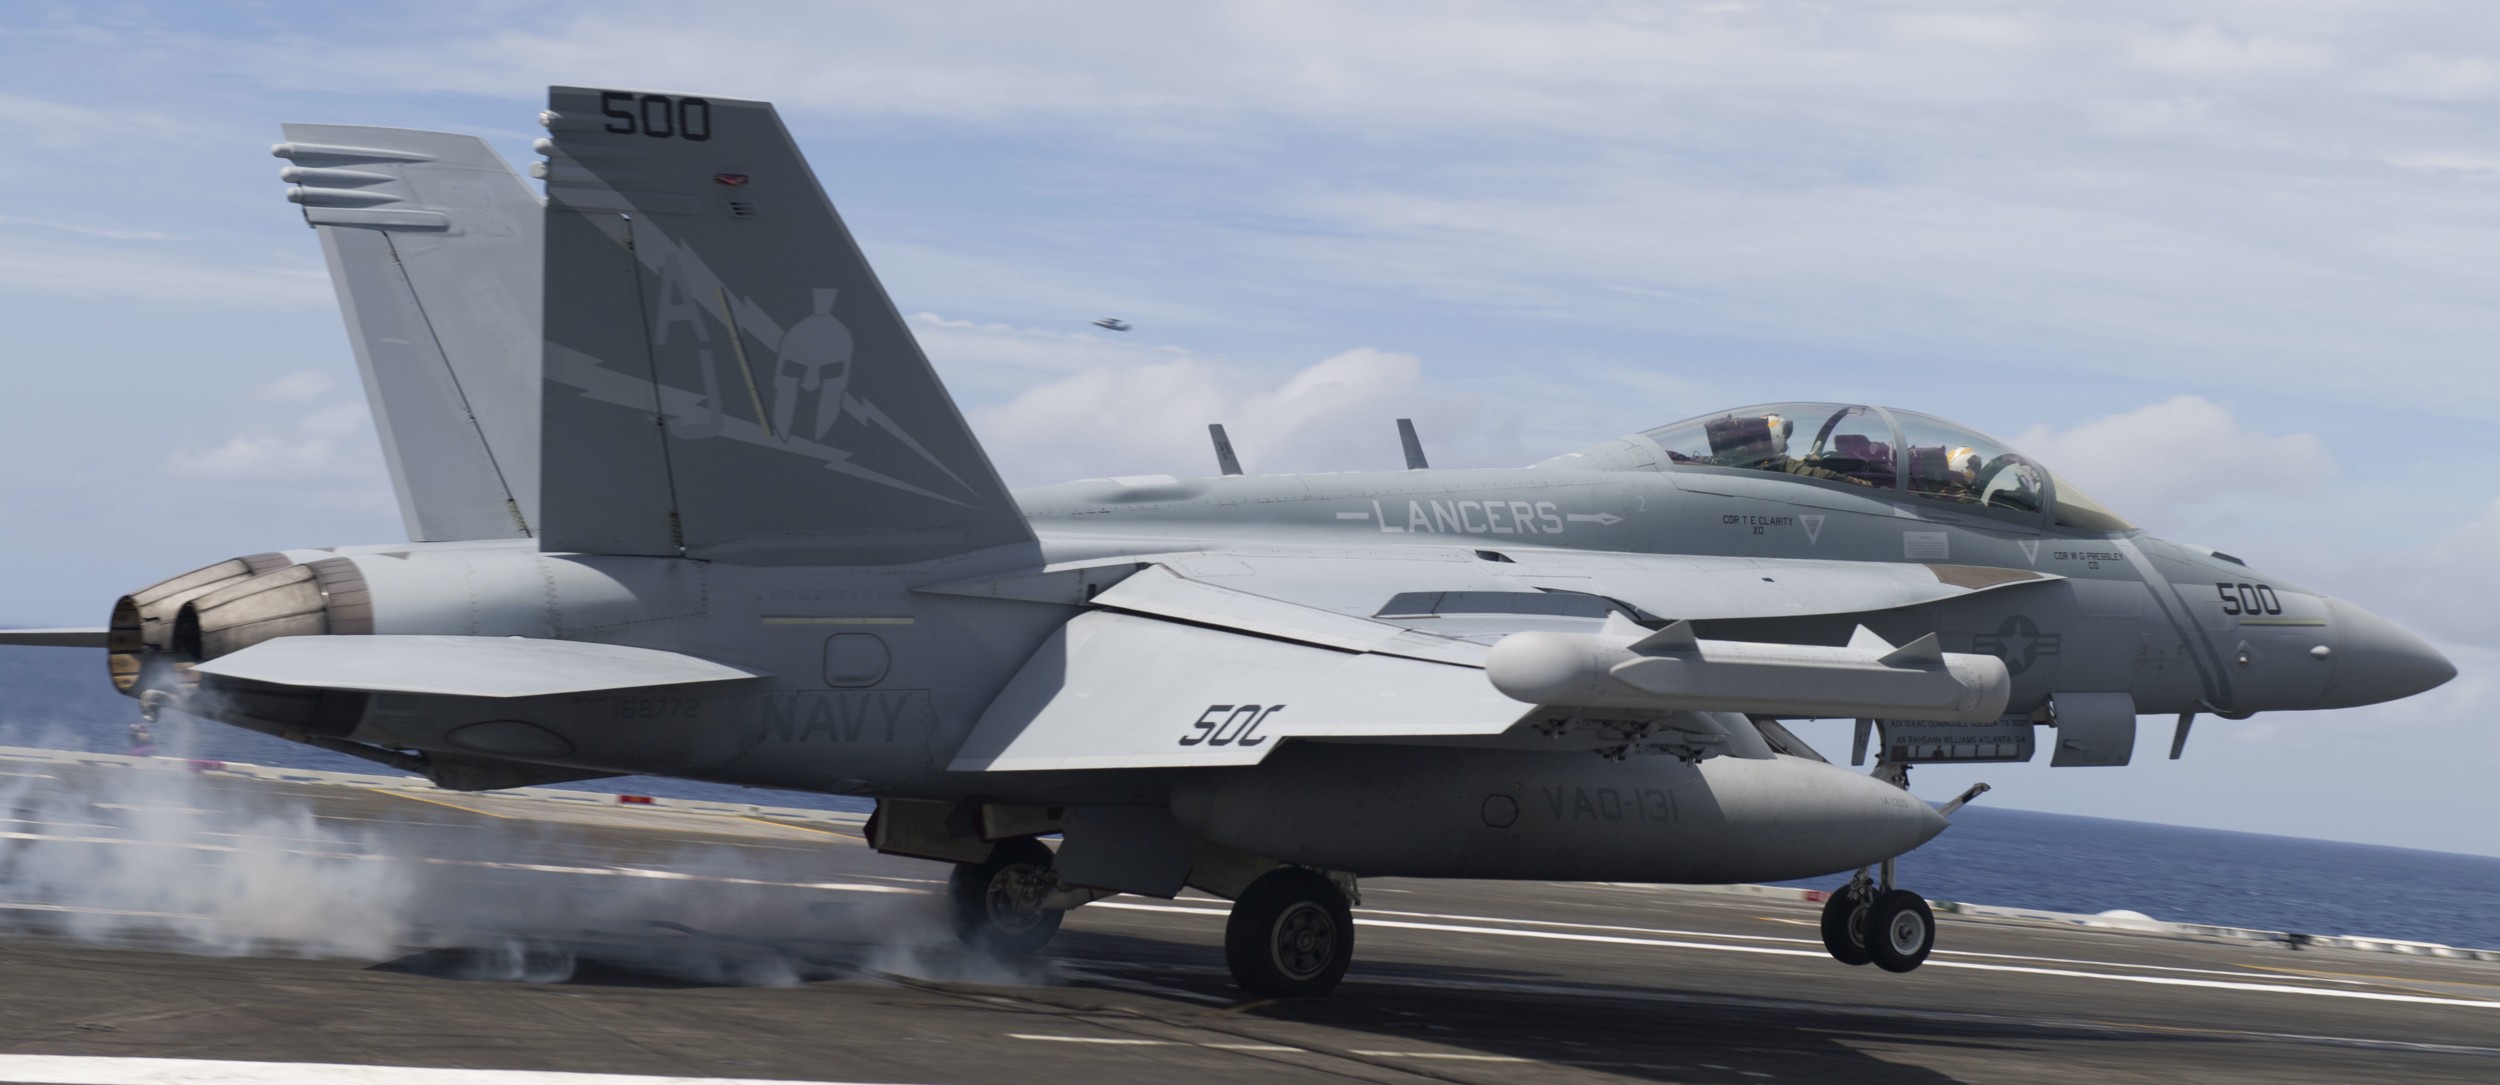 vaq-131 lancers electronic attack squadron vaqron us navy boeing ea-18g growler aircraft carrier air wing cvw-8 uss george h. w. bush cvn-77 106